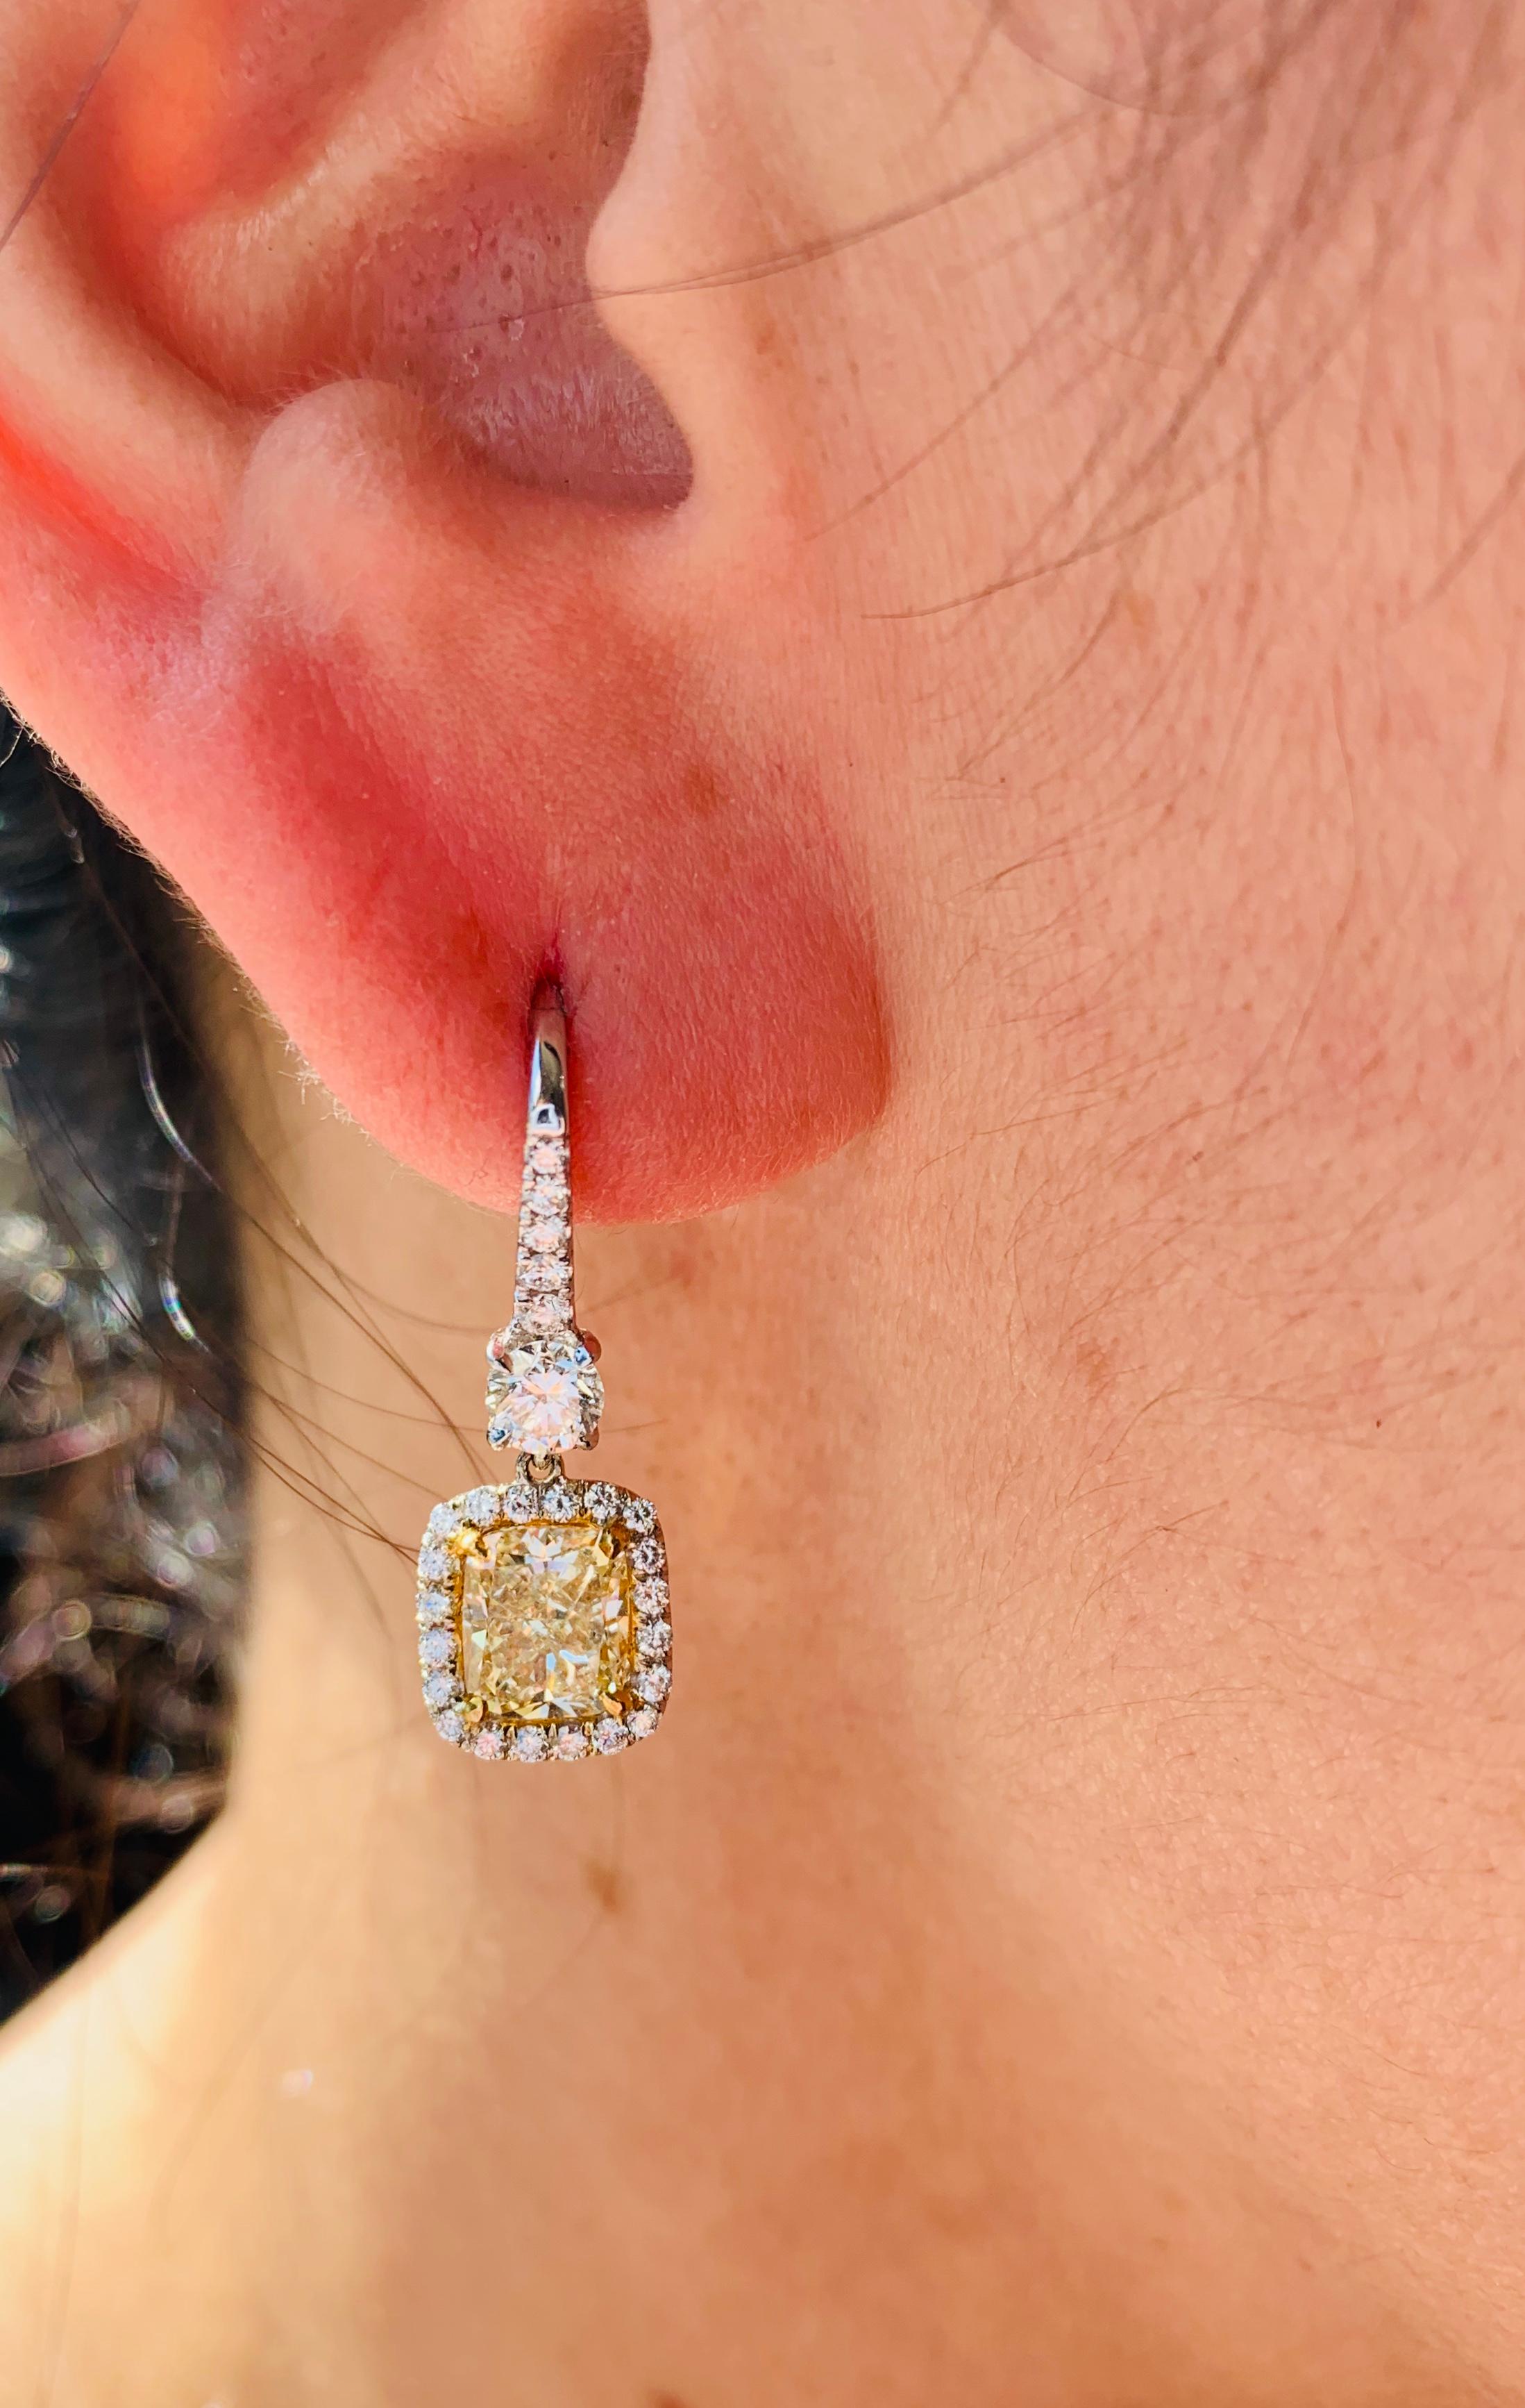 Stunning Yellow Diamond Earrings, certified by GIA laboratory features 2.53 Carats of Fancy Light Yellow Cushion Cut diamonds, SI in Clarity. 
GIA#2175791322
GIA#1162644850
Two main yellow diamonds, surrounded by white brilliant cut diamonds